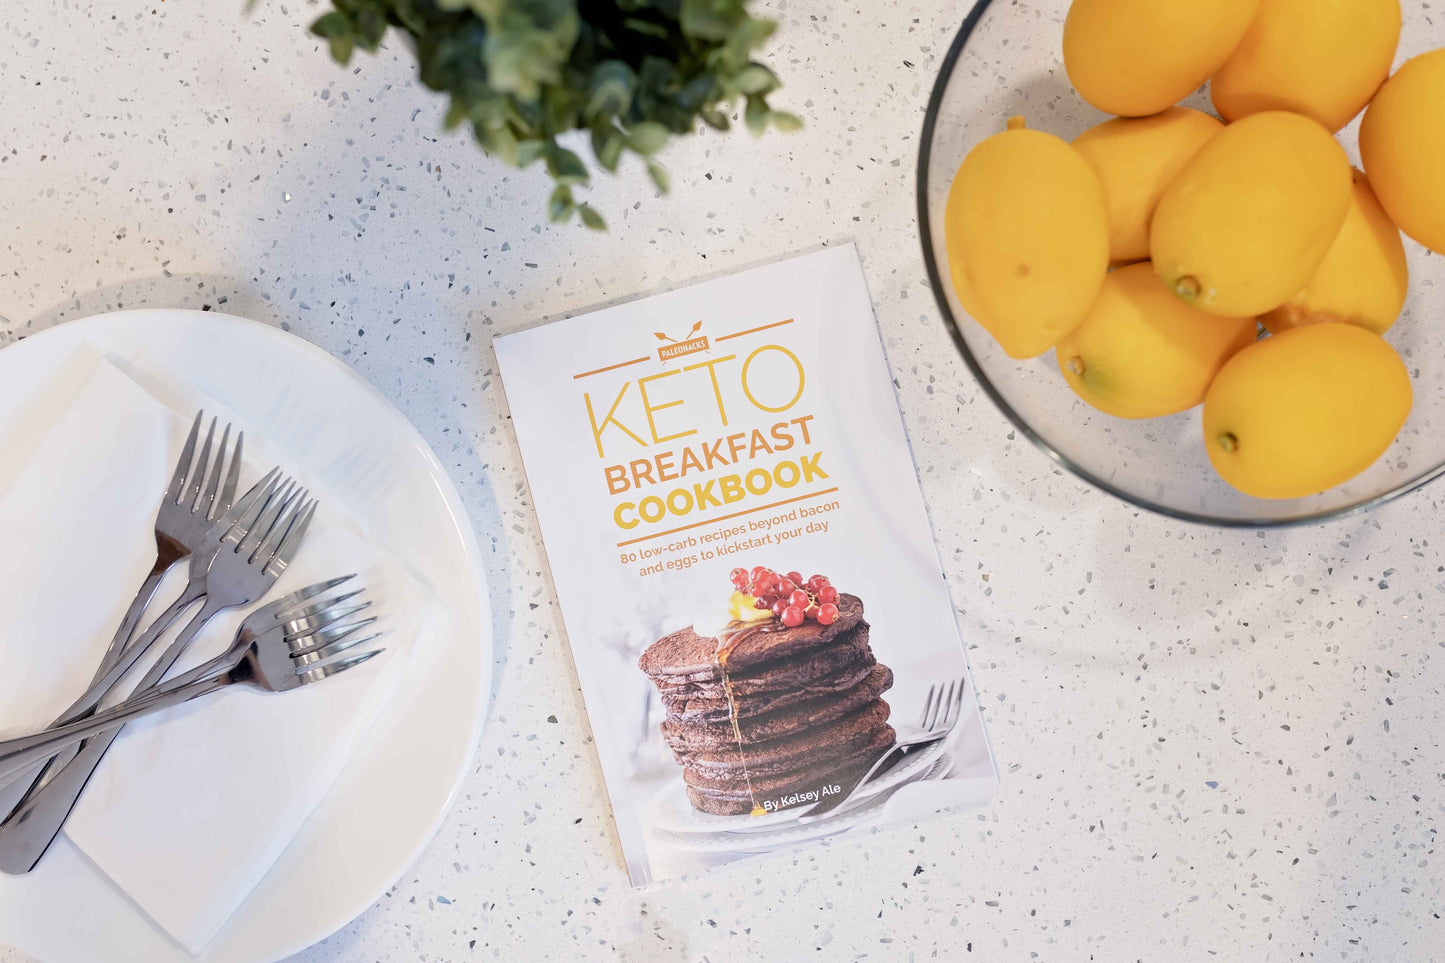 Keto breakfast cookbook laid on a marble surface with a bowl of fruits and a plate with cutlery.